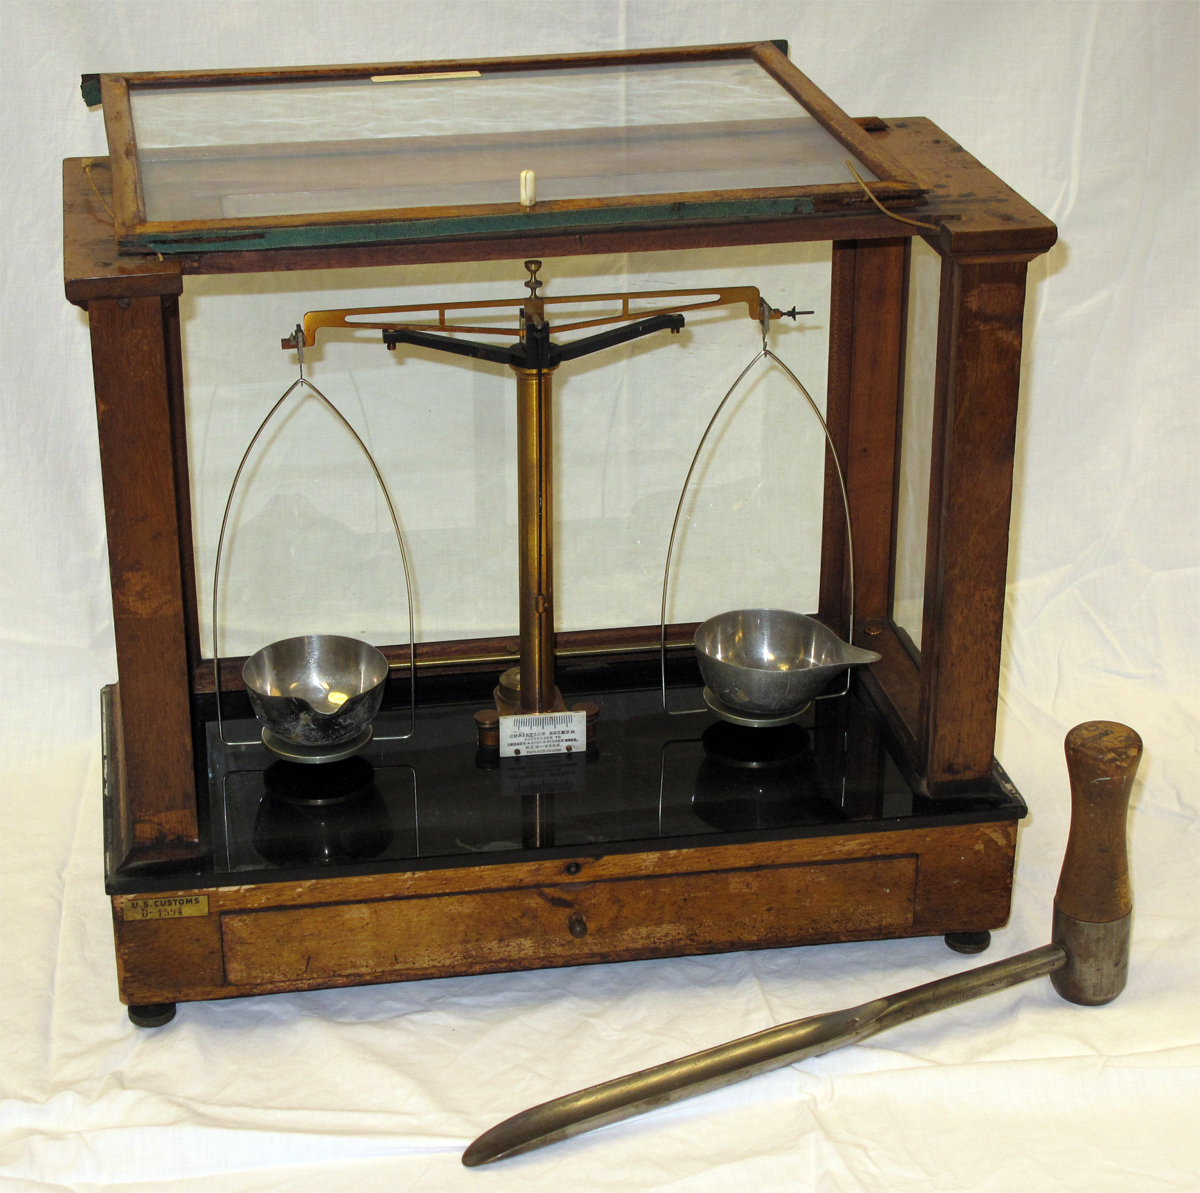 This sugar balance and trier (scoop) were used by U.S. Customs Service in preparing sugar for testing. They were manufactured to precise specifications to insure equality in sampling across all of Customs.